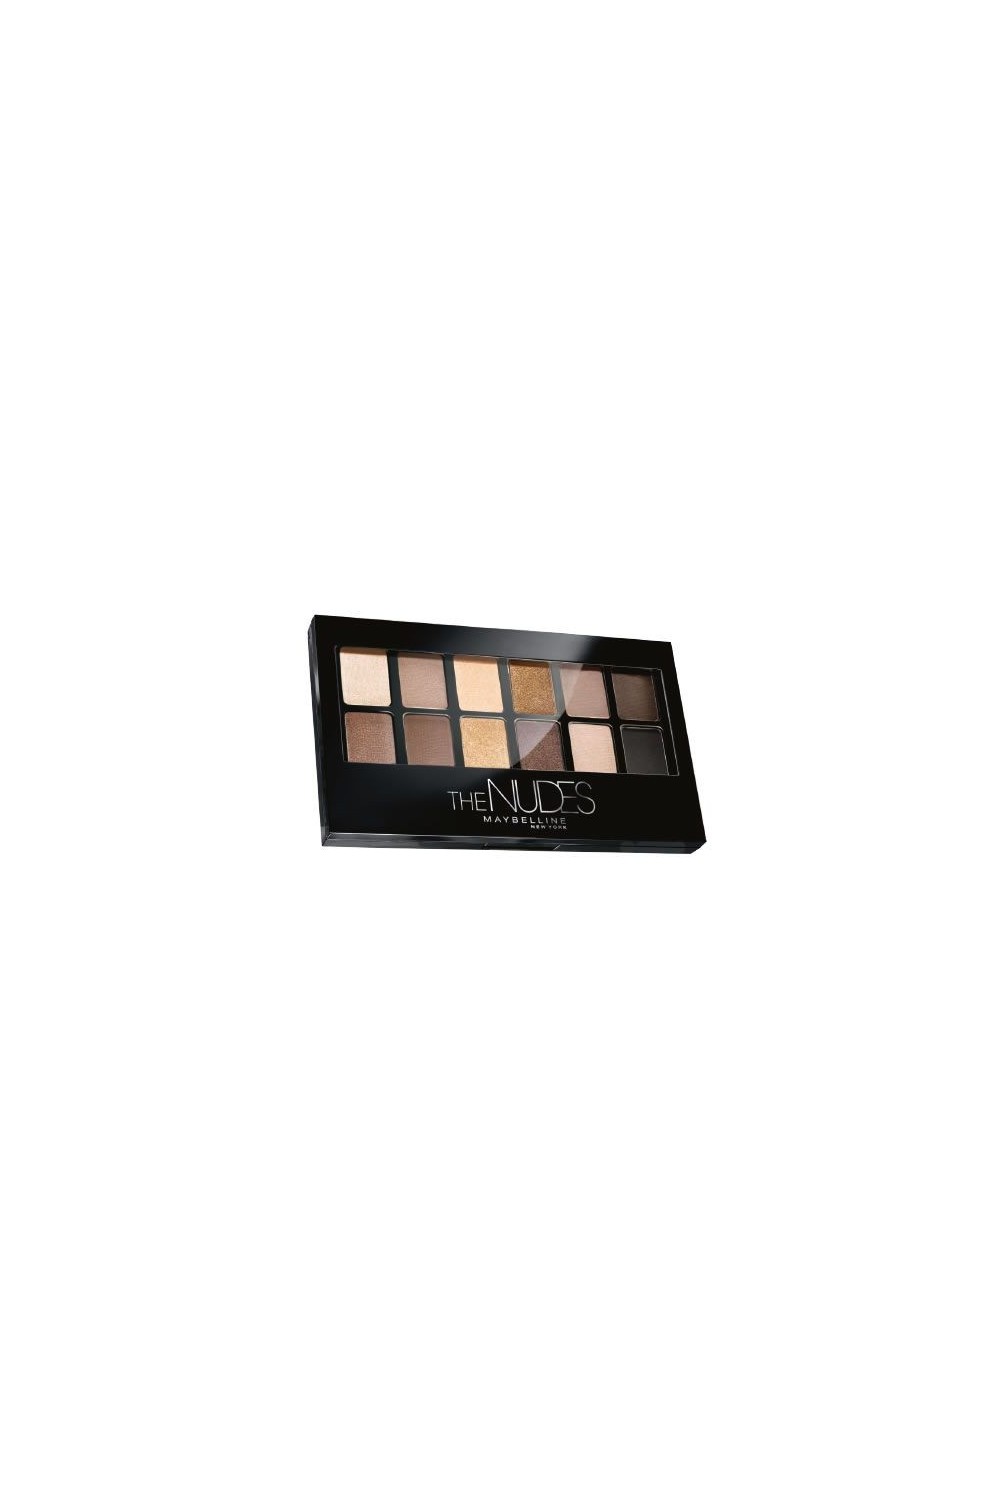 Maybelline The Nudes Eye Shadow Palette 01